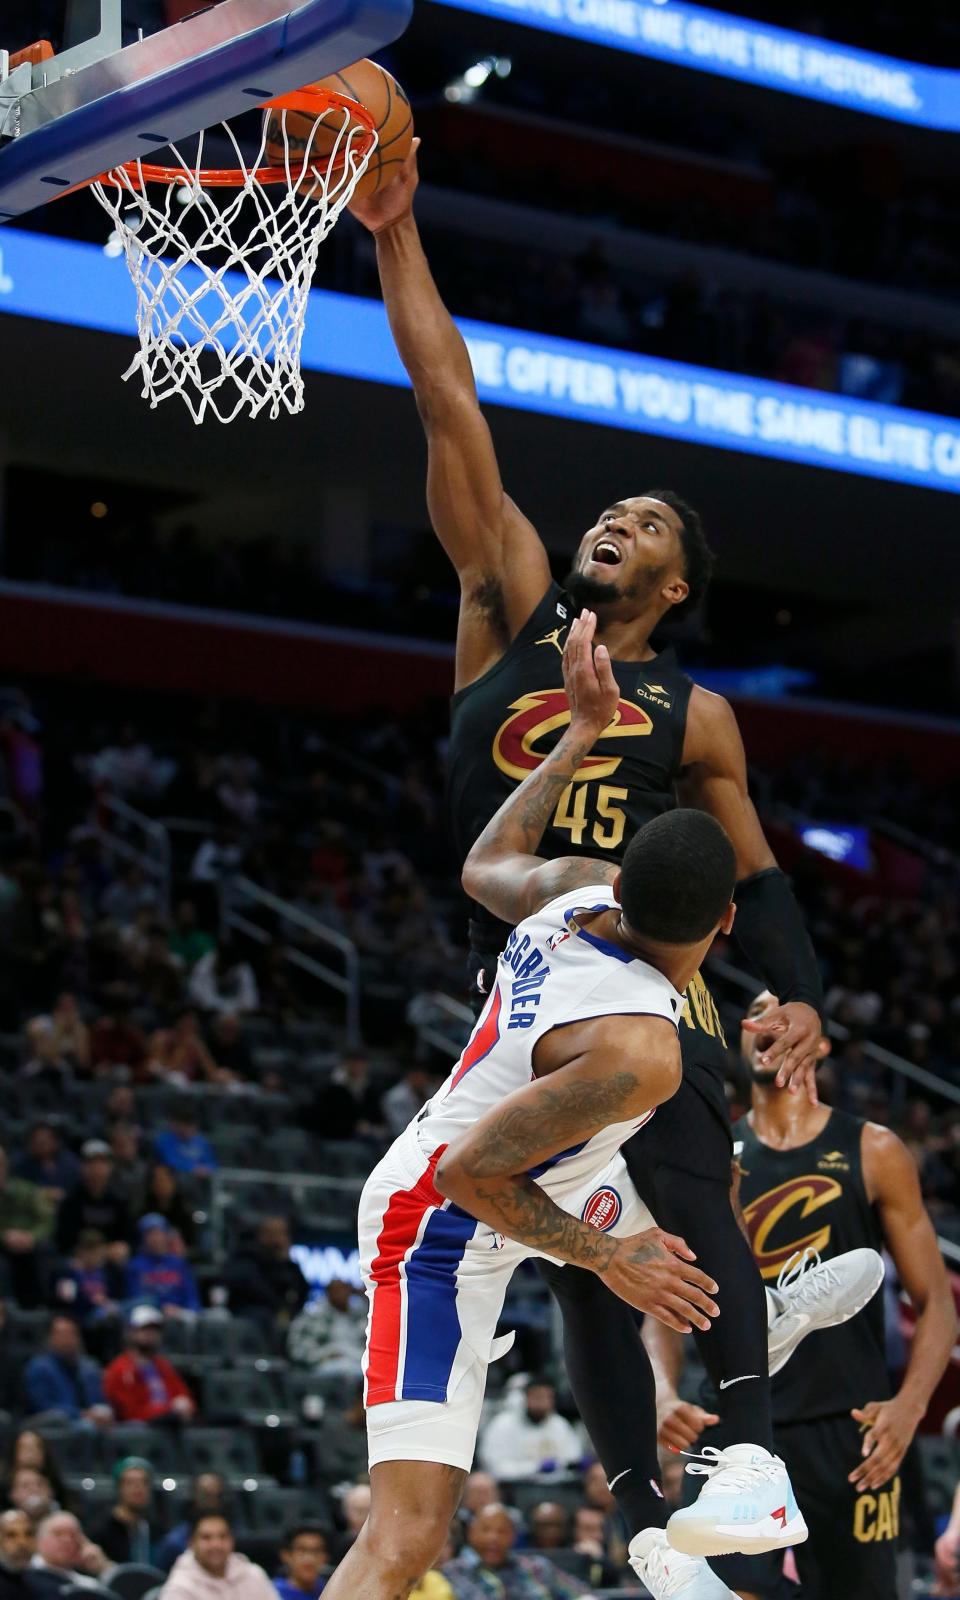 Cavaliers guard Donovan Mitchell (45) goes over Pistons guard Rodney McGruder (17) to dunk during the second half Sunday, Nov. 27, 2022, in Detroit. The Cavaliers won 102-94.